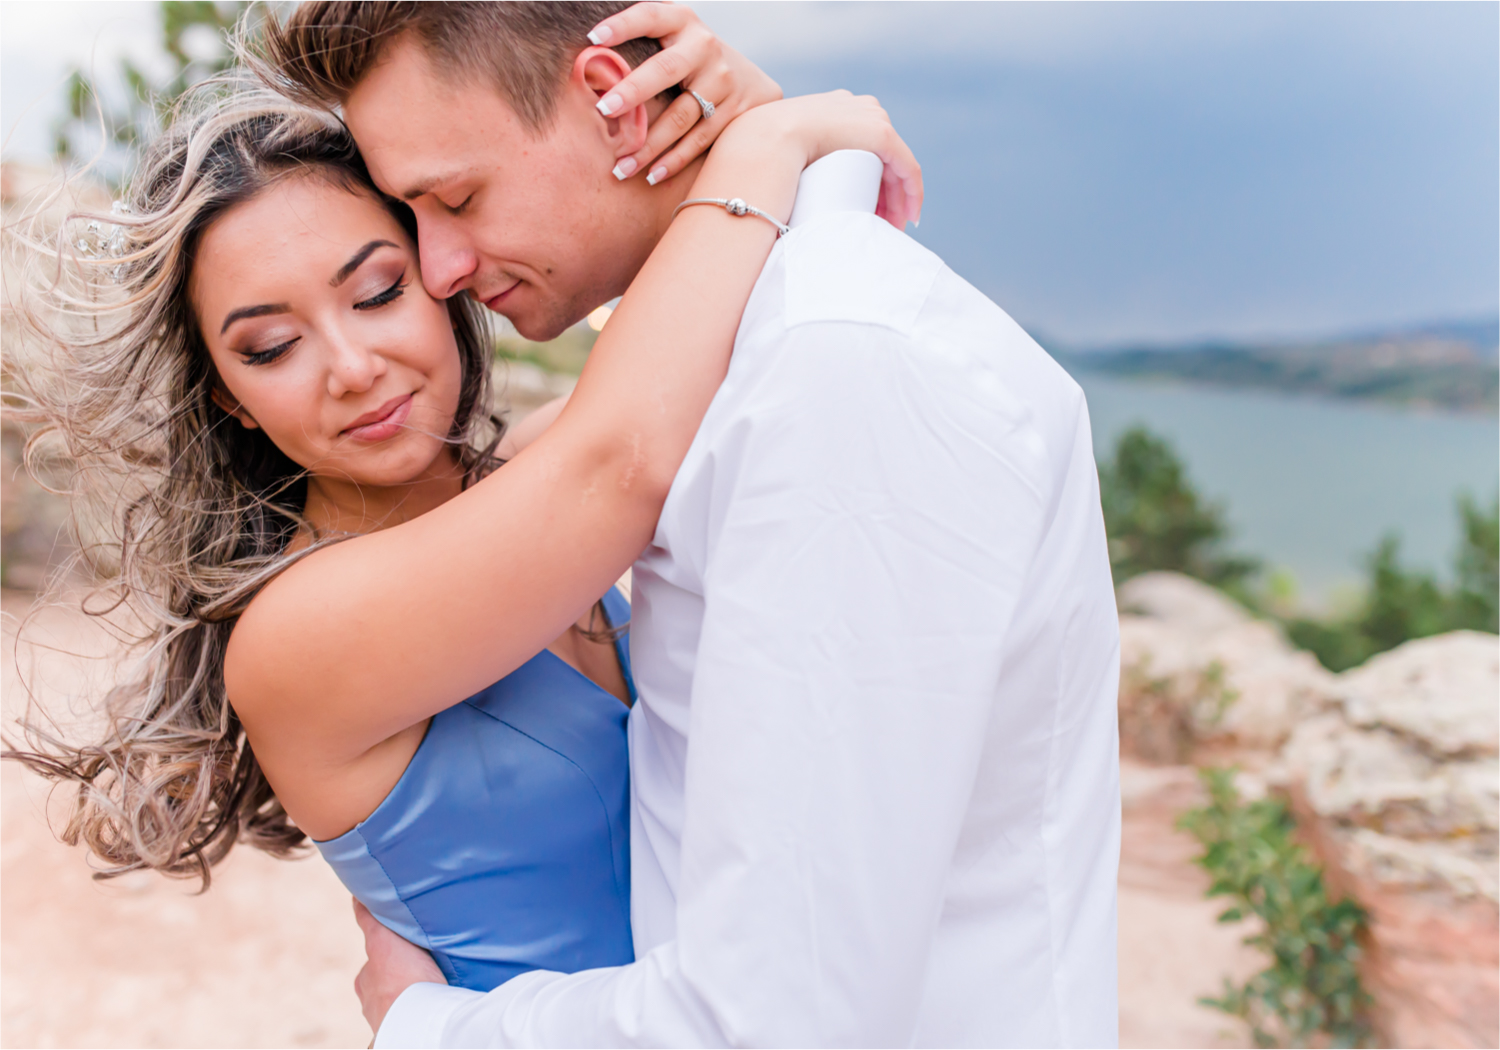 Romantic and Playful Summer engagement session at Horsetooth Reservoir in Fort Collins Colorado | Britni Girard Photographer | Wedding photographer and videographer team | Stormy and Windy Engagement on the cliffs of Horsetooth | Rotary Park